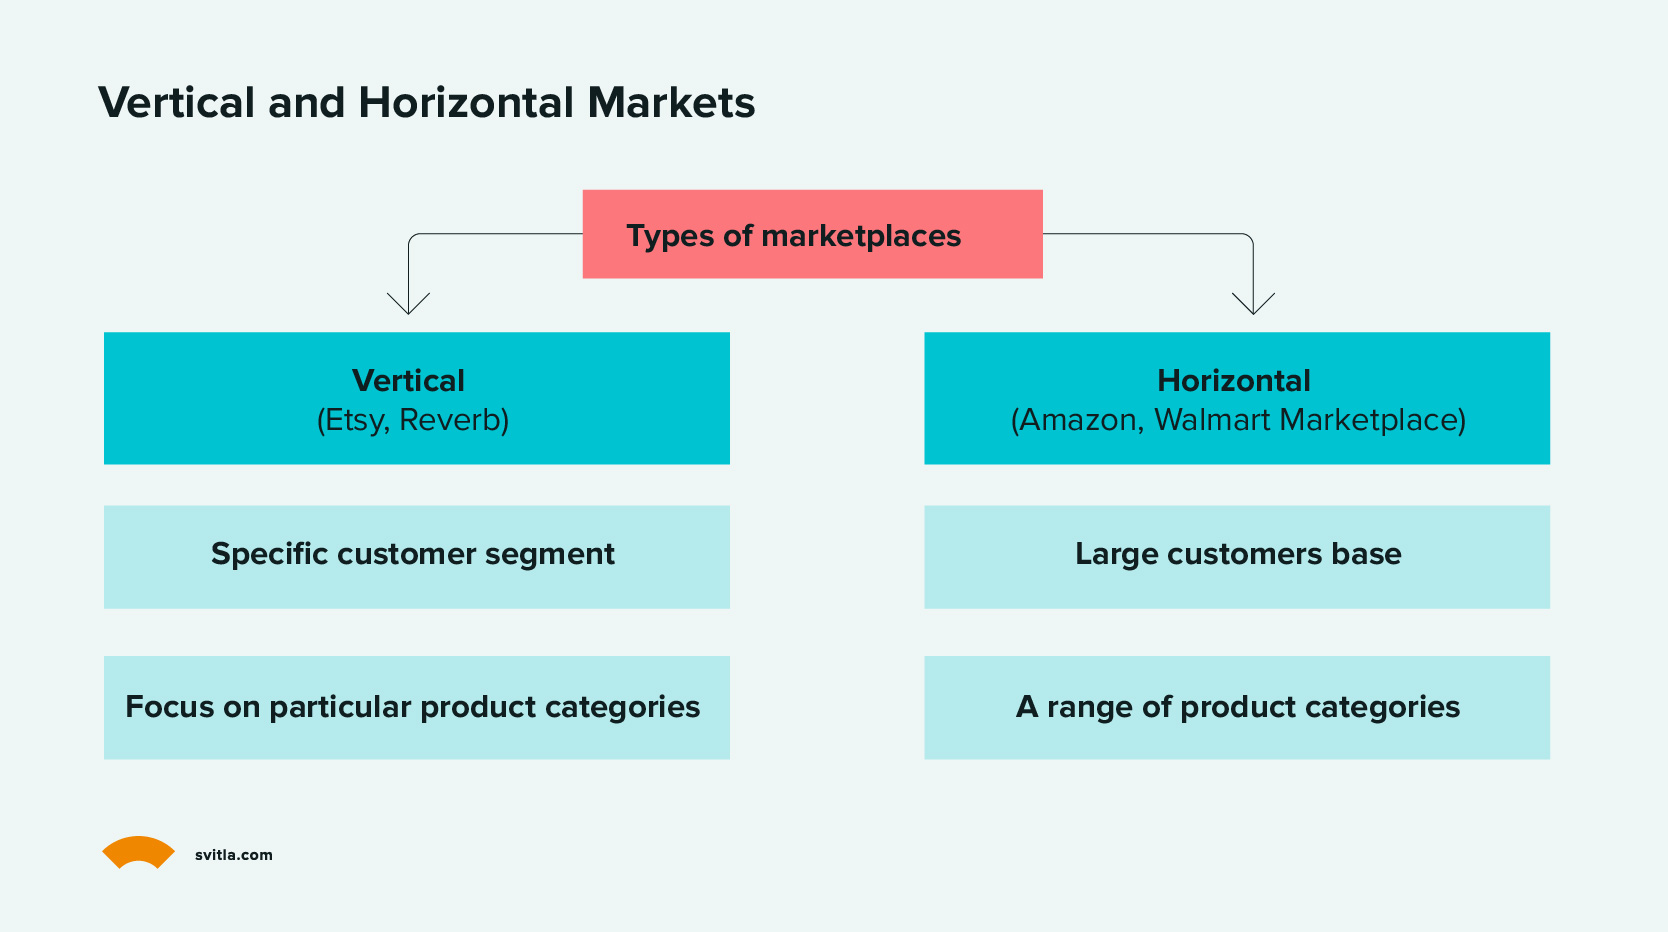 Vertical and horizontal marketplaces